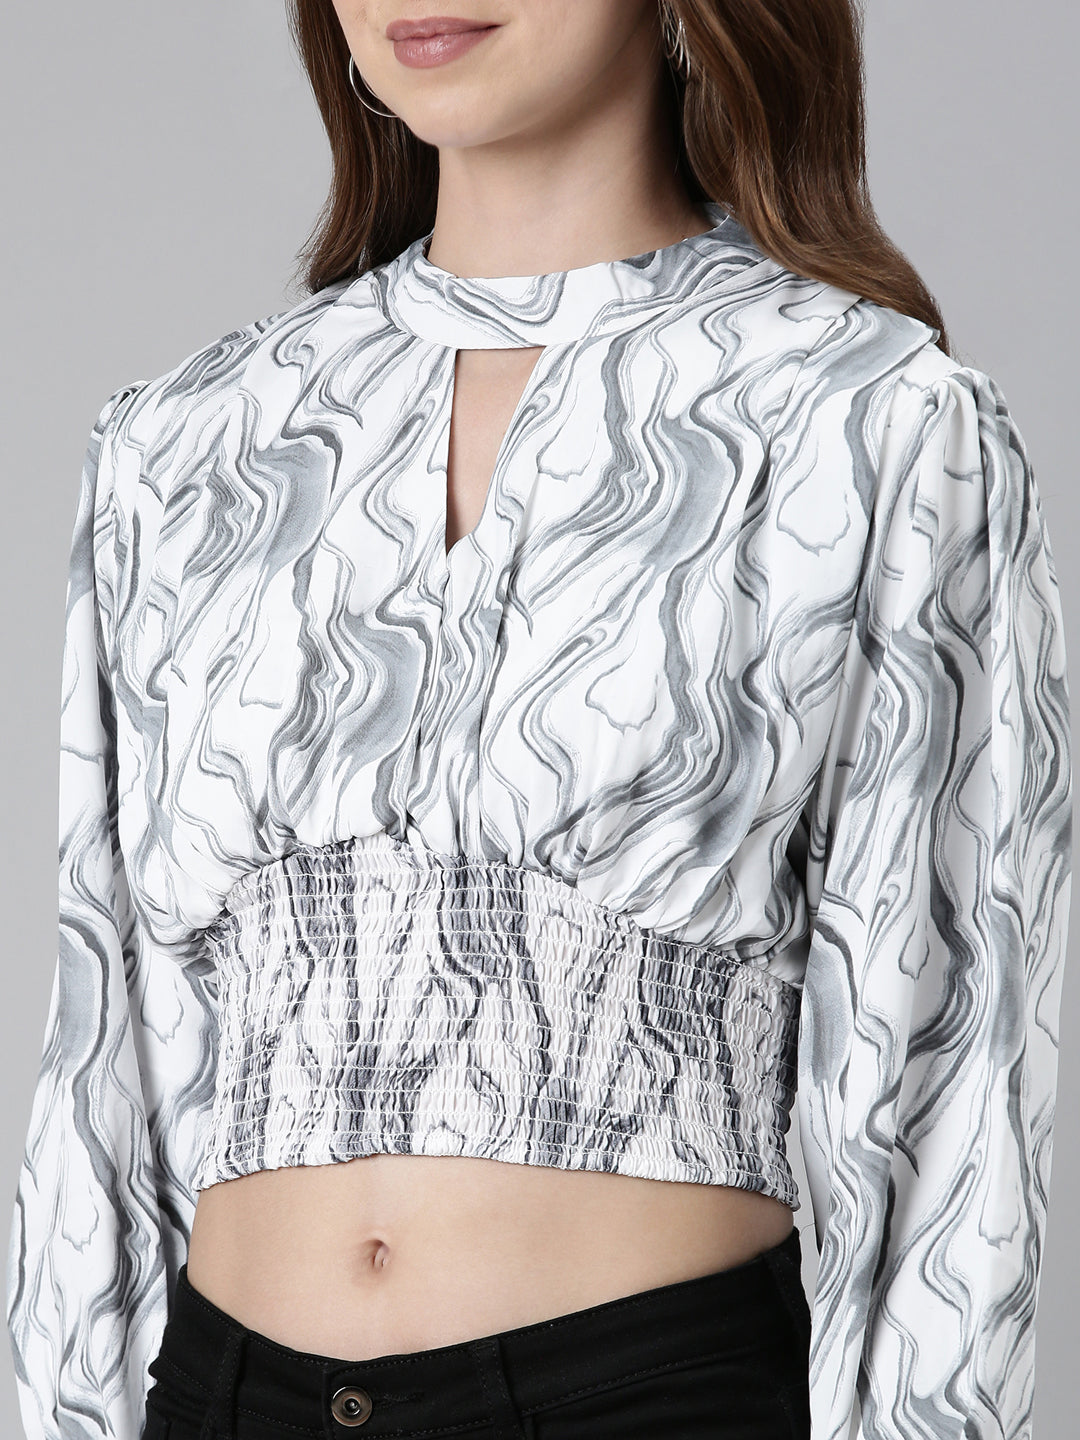 Keyhole Neck Cuffed Sleeves Abstract Cinched Waist Grey Crop Top